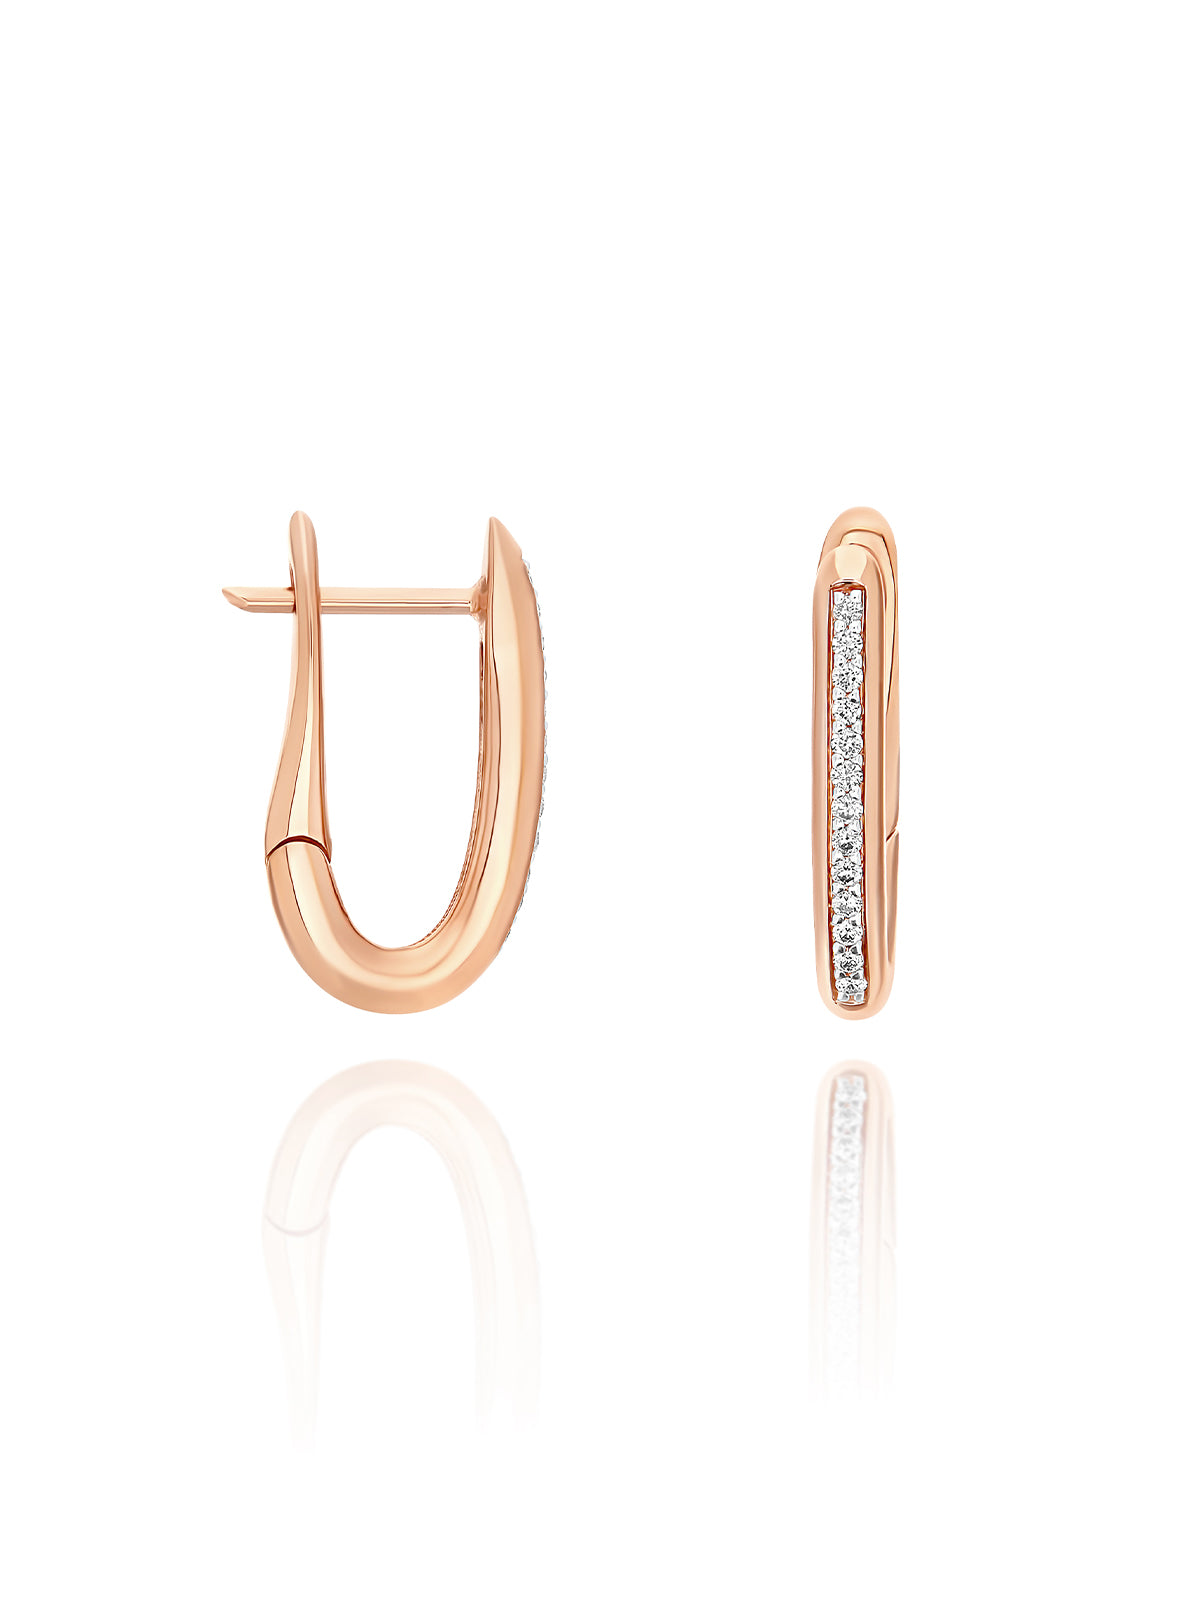 "Libera" small rose gold square hoop earrings with diamonds